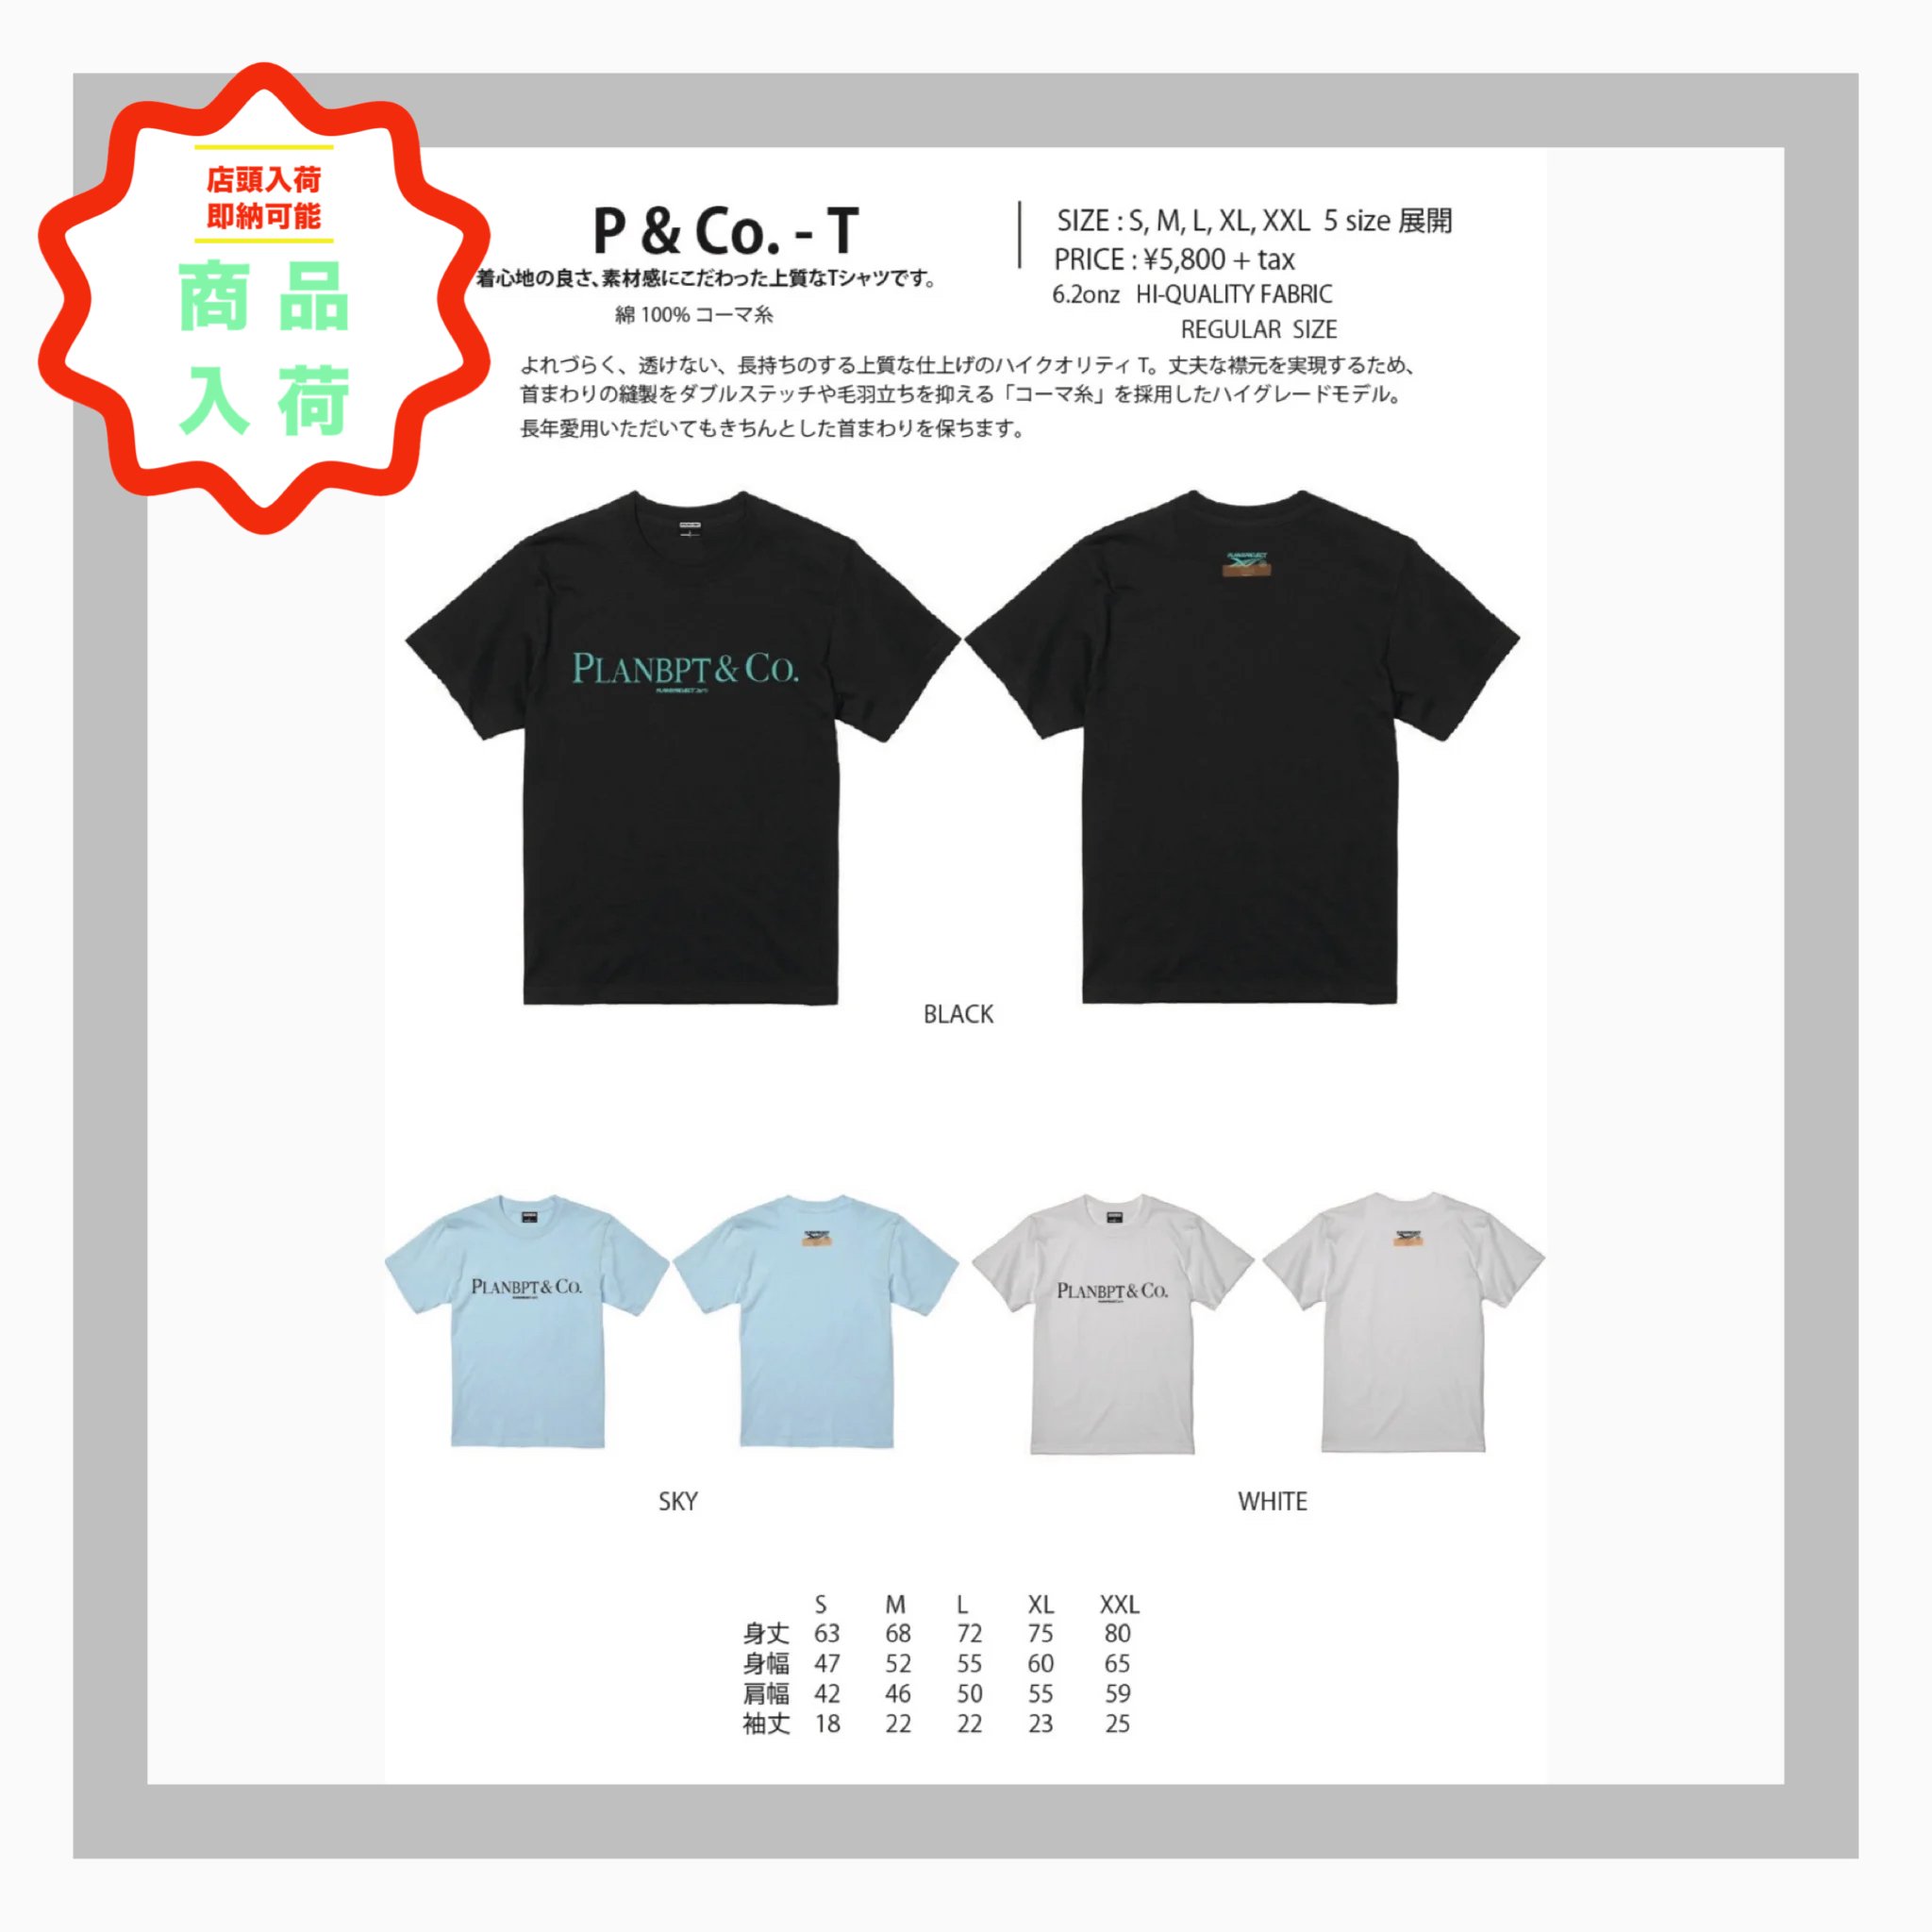 <img class='new_mark_img1' src='https://img.shop-pro.jp/img/new/icons14.gif' style='border:none;display:inline;margin:0px;padding:0px;width:auto;' />MOUNTAIN ROCK STAR SUMMER Apparel P&Co.-T